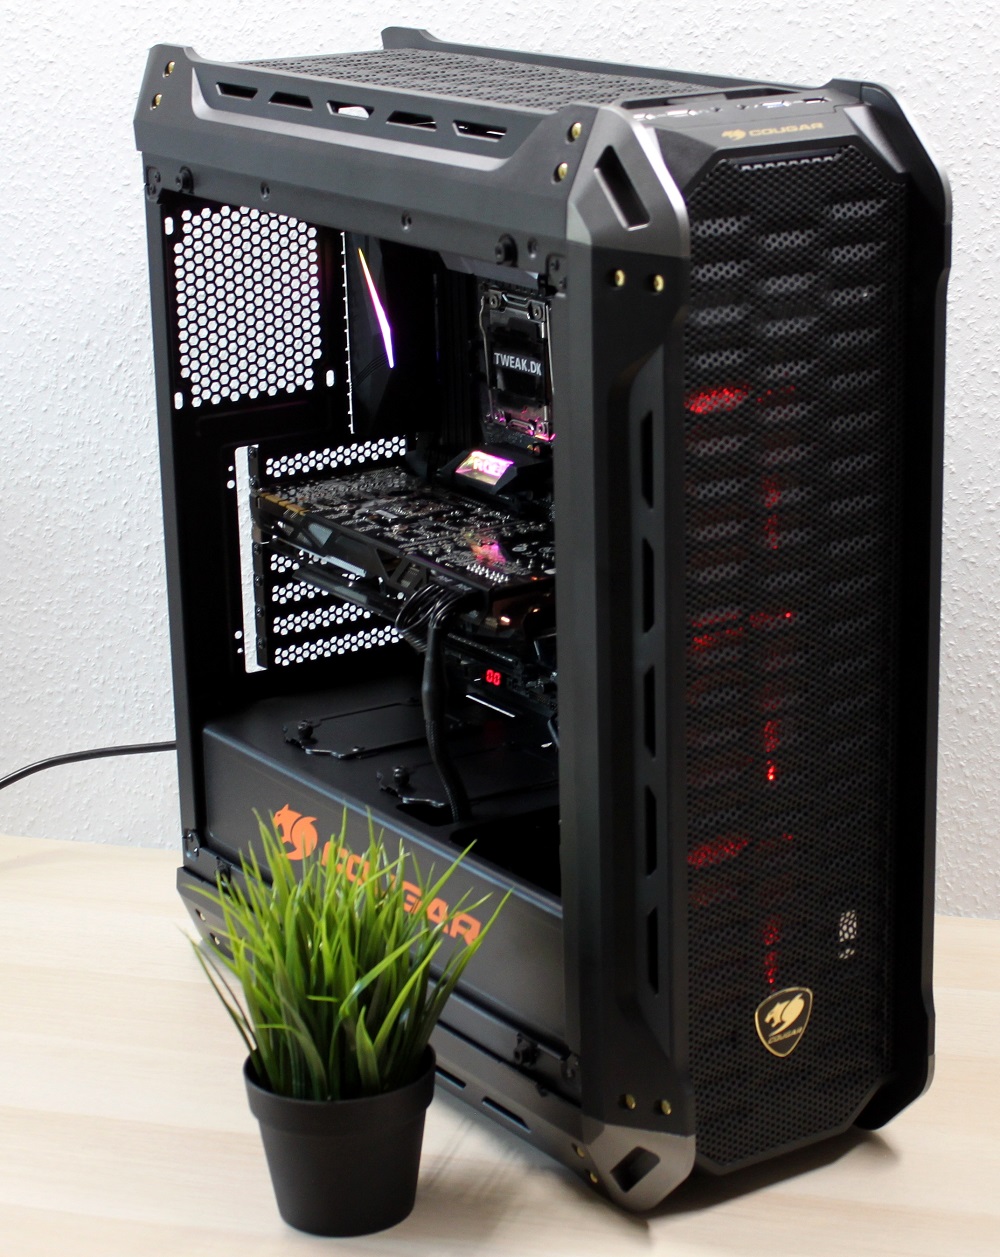 Cougar computer mid-tower chassis